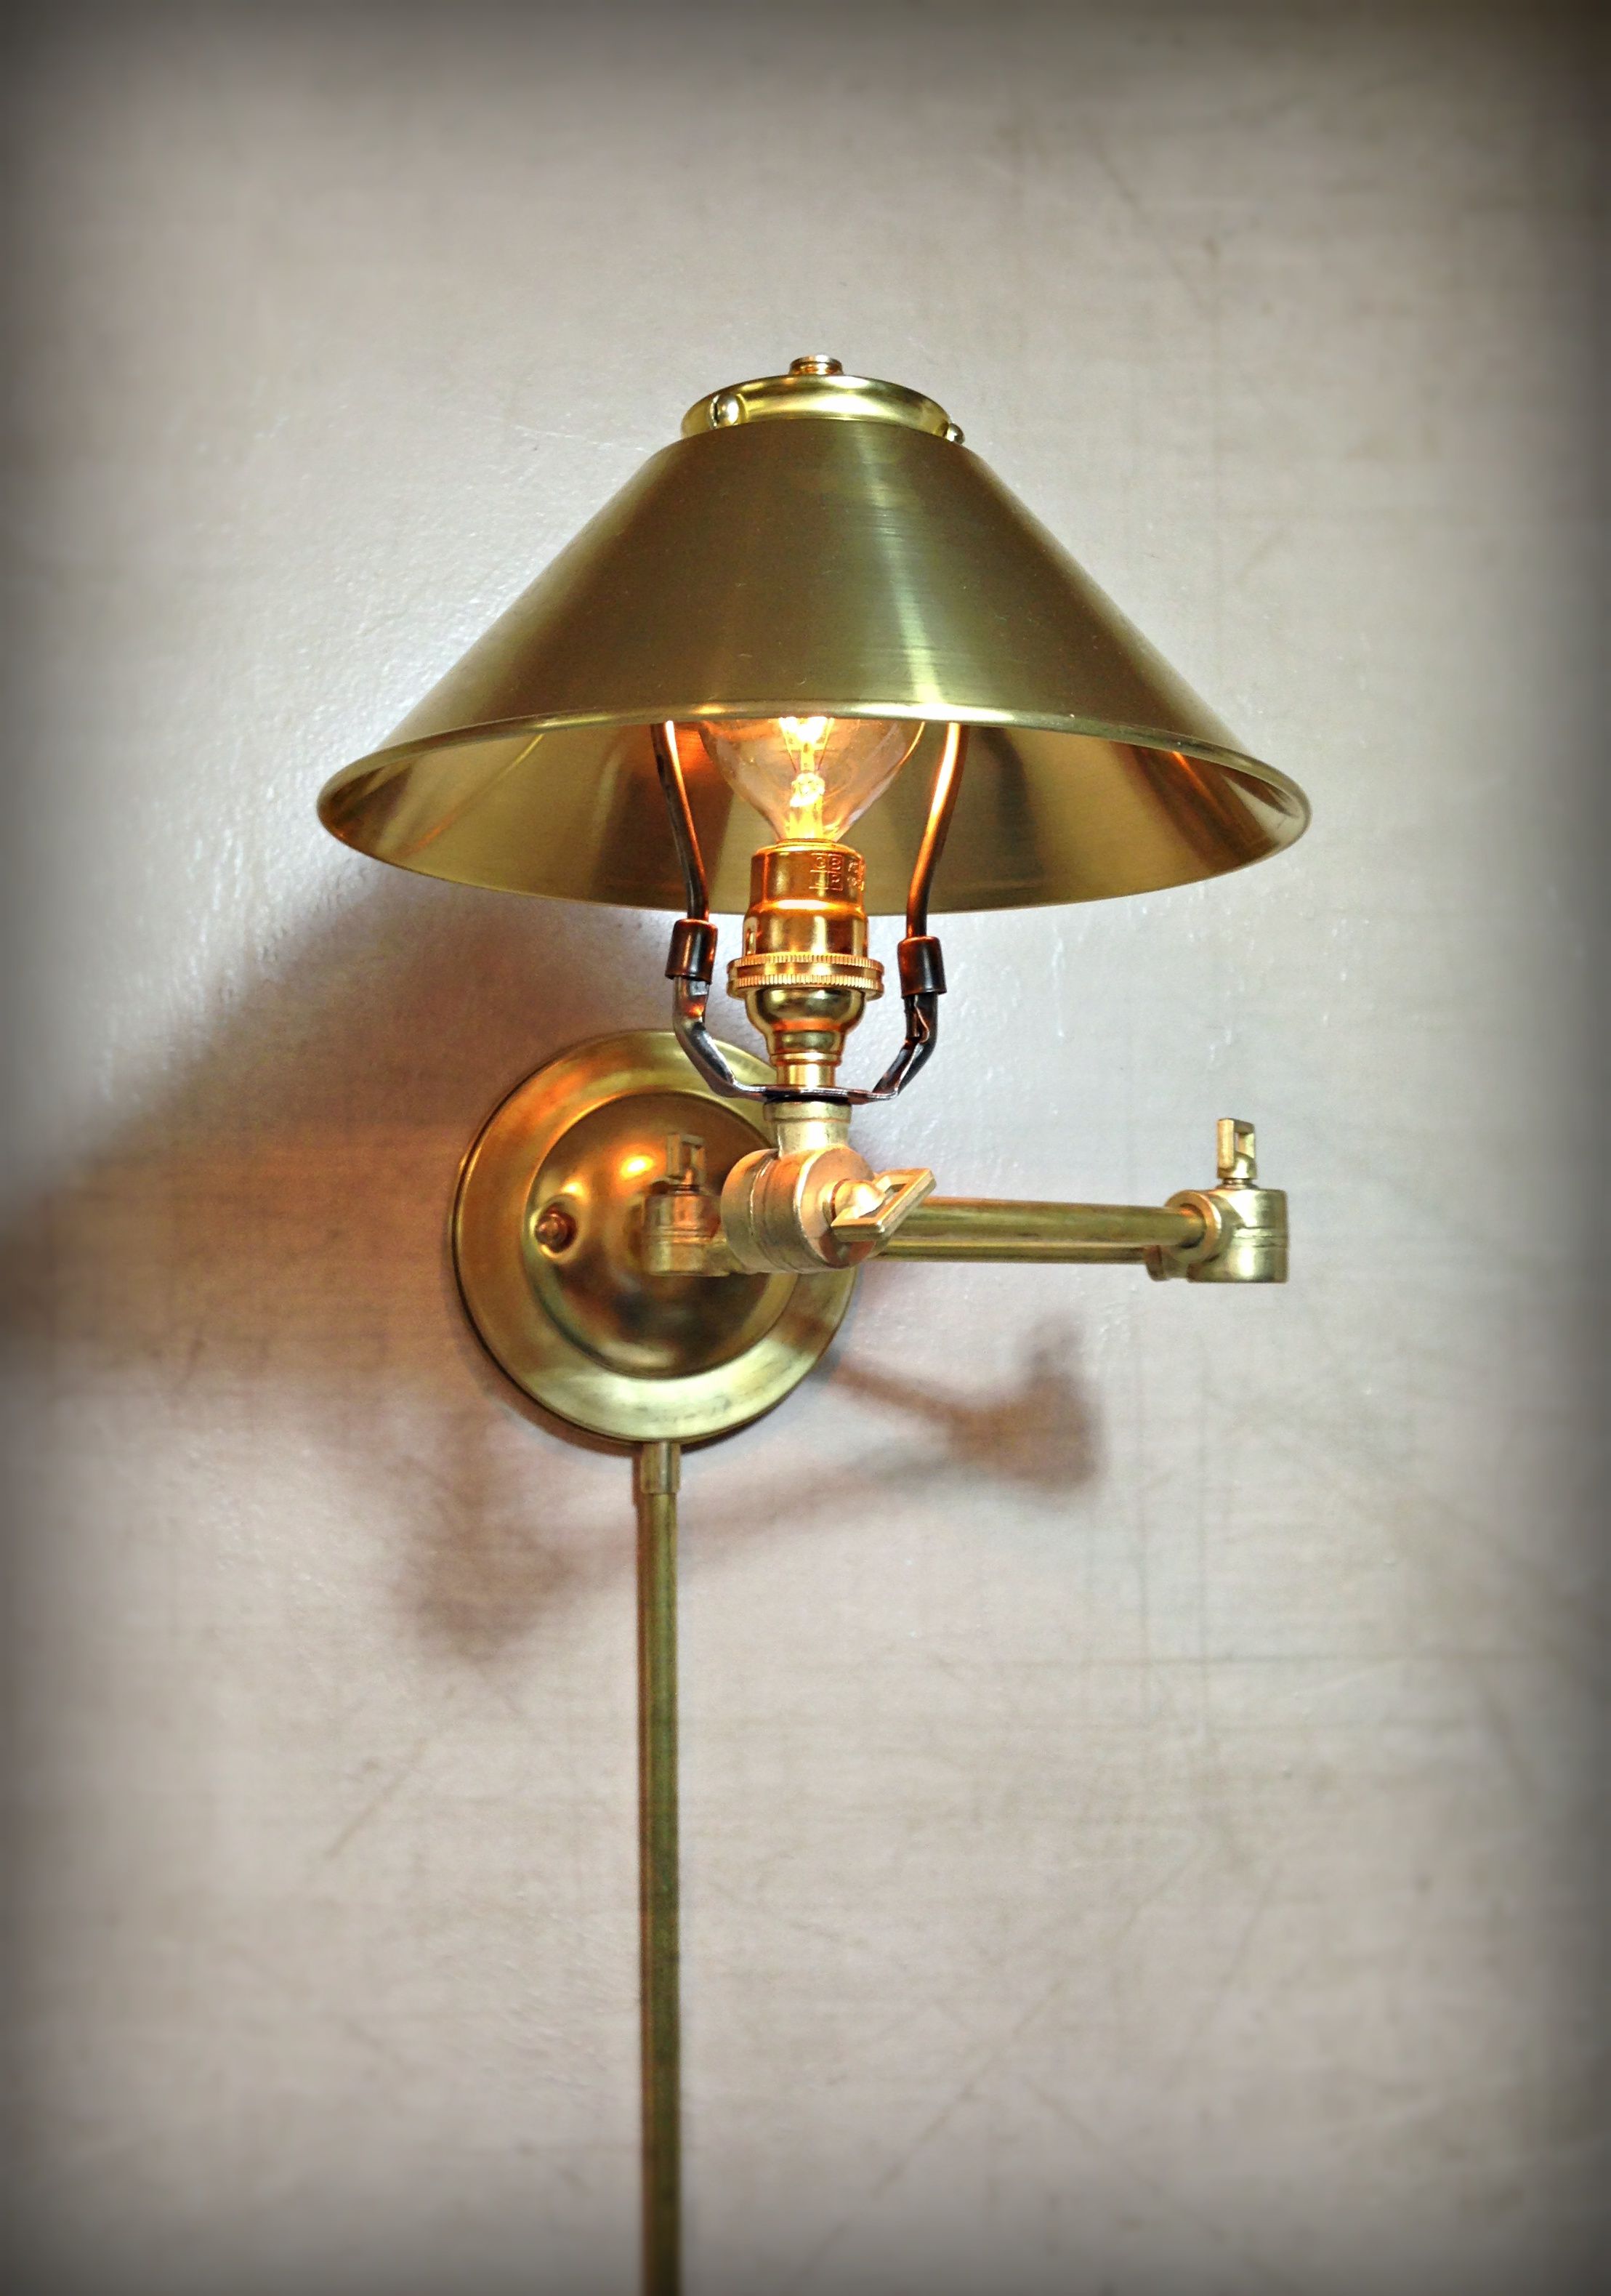 Buy Custom Adjustable Articulating Wall Mount Light - Plug-In Metal Sconce  - Steel And Brass, Edison Bulbs, made to order from Retro Steam Works